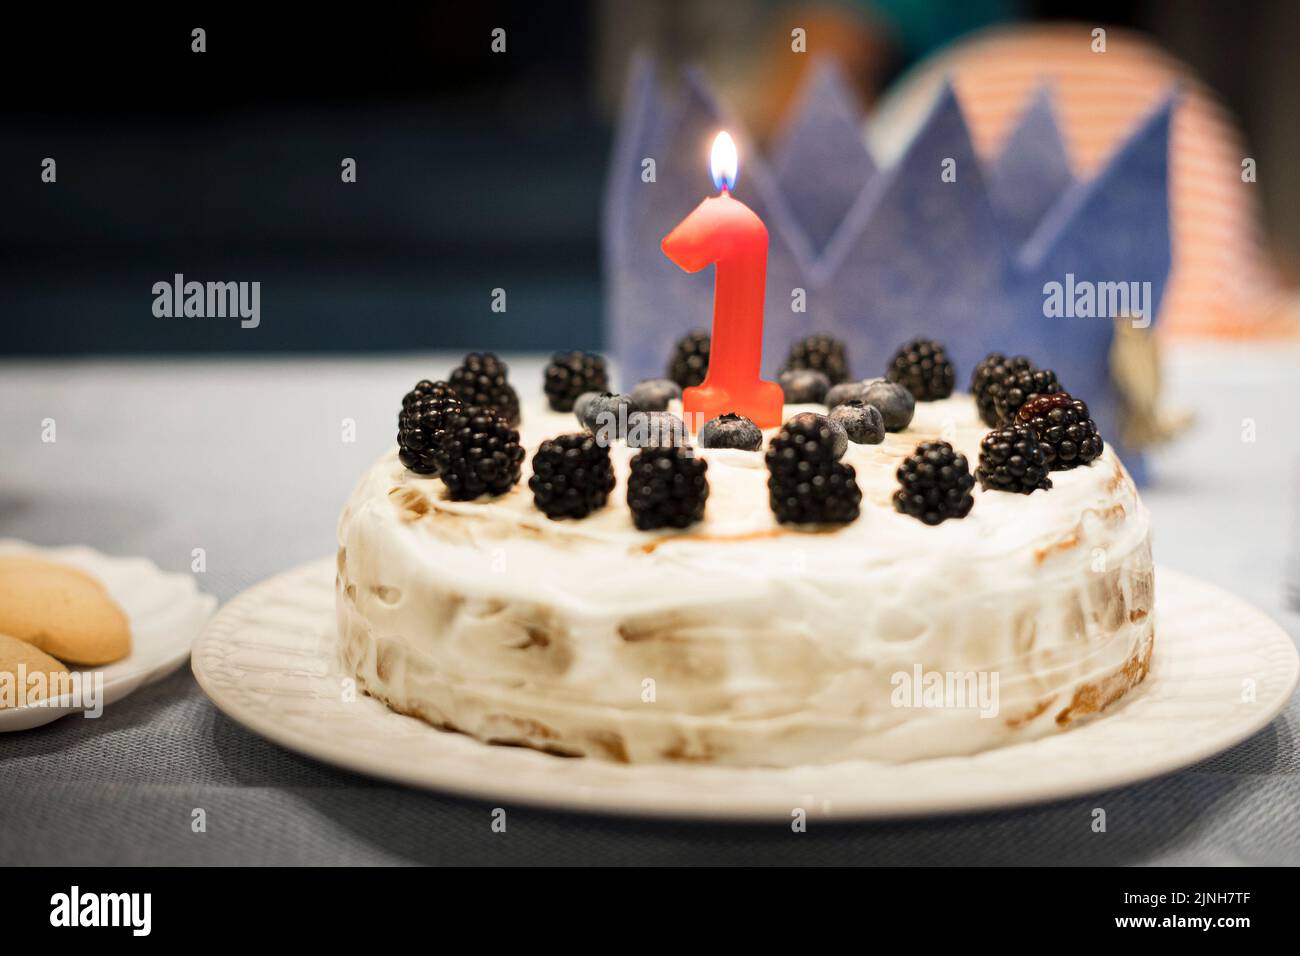 Simple homemade birthday cake for one year old baby party, with berries and red candle. Background with copy space. Stock Photo